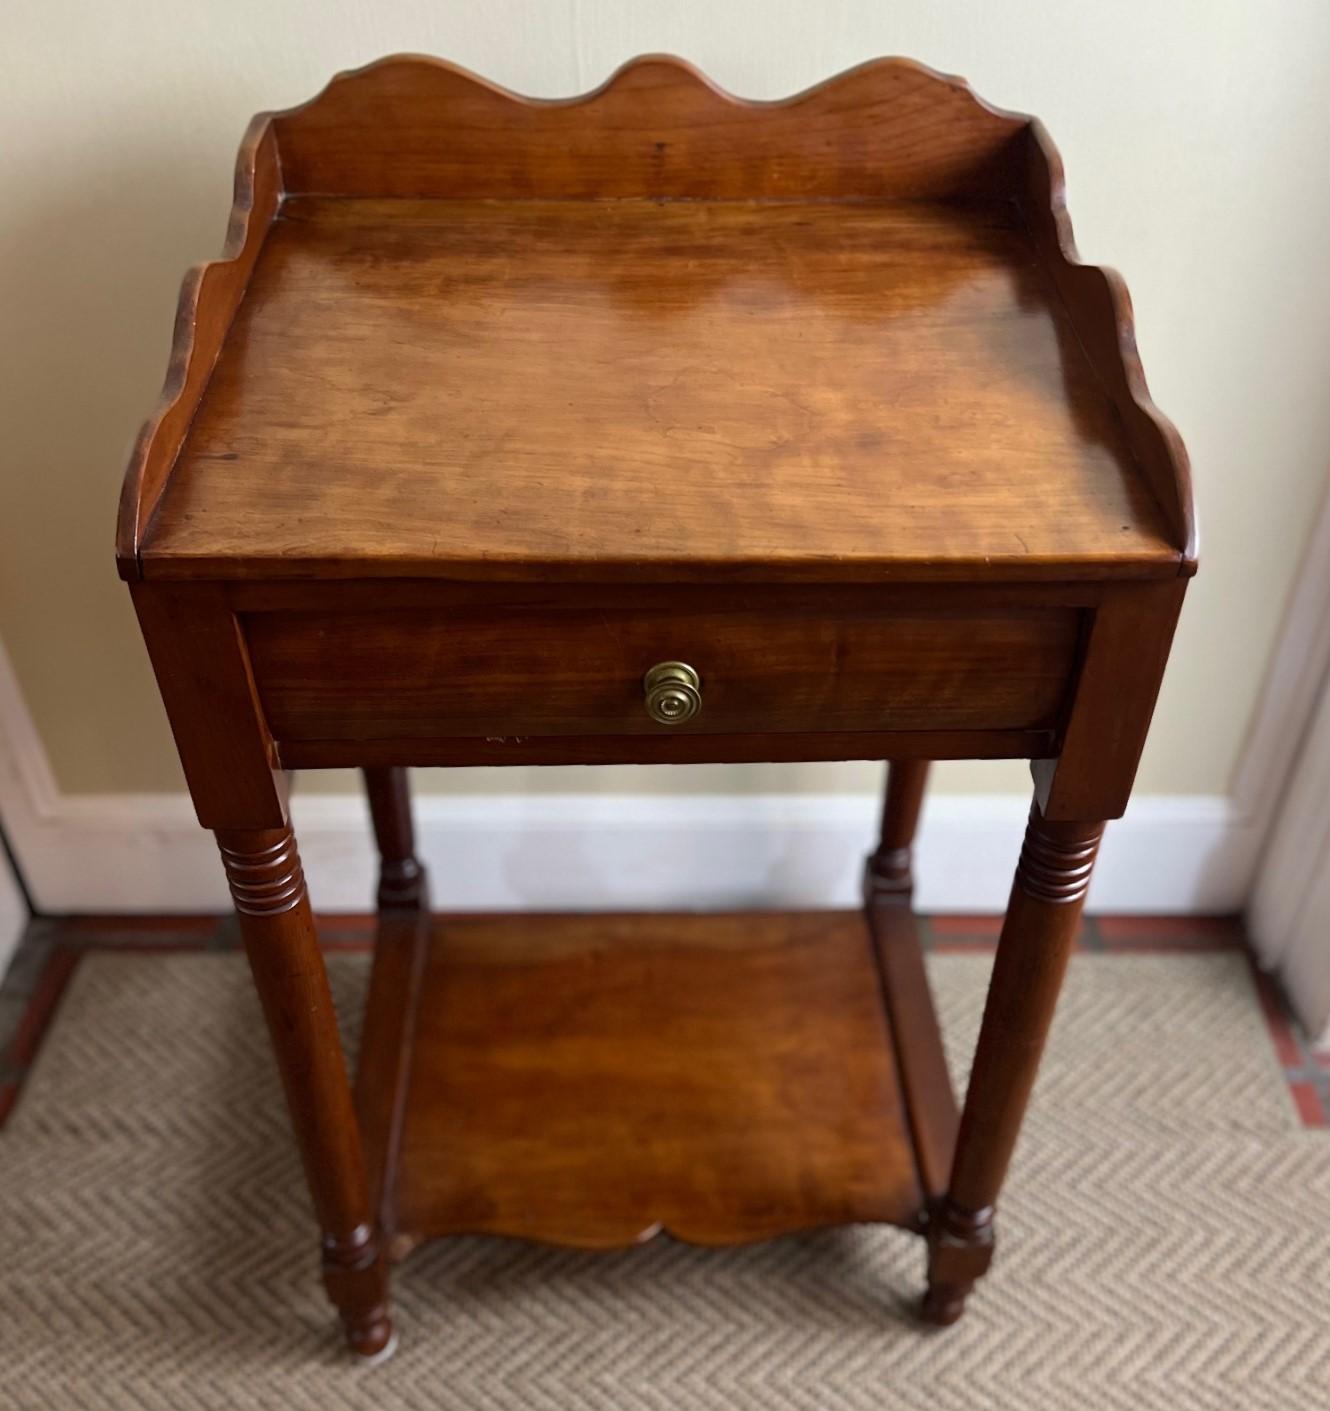 Late 20th C. rich honey colored wooden bedside table/nightstand with a drawer, low shelf and bobbin style turned legs. The table has nice details with scalloped gallery sides on the table top, a bow drawer front and a nicely curved lower shelf. This